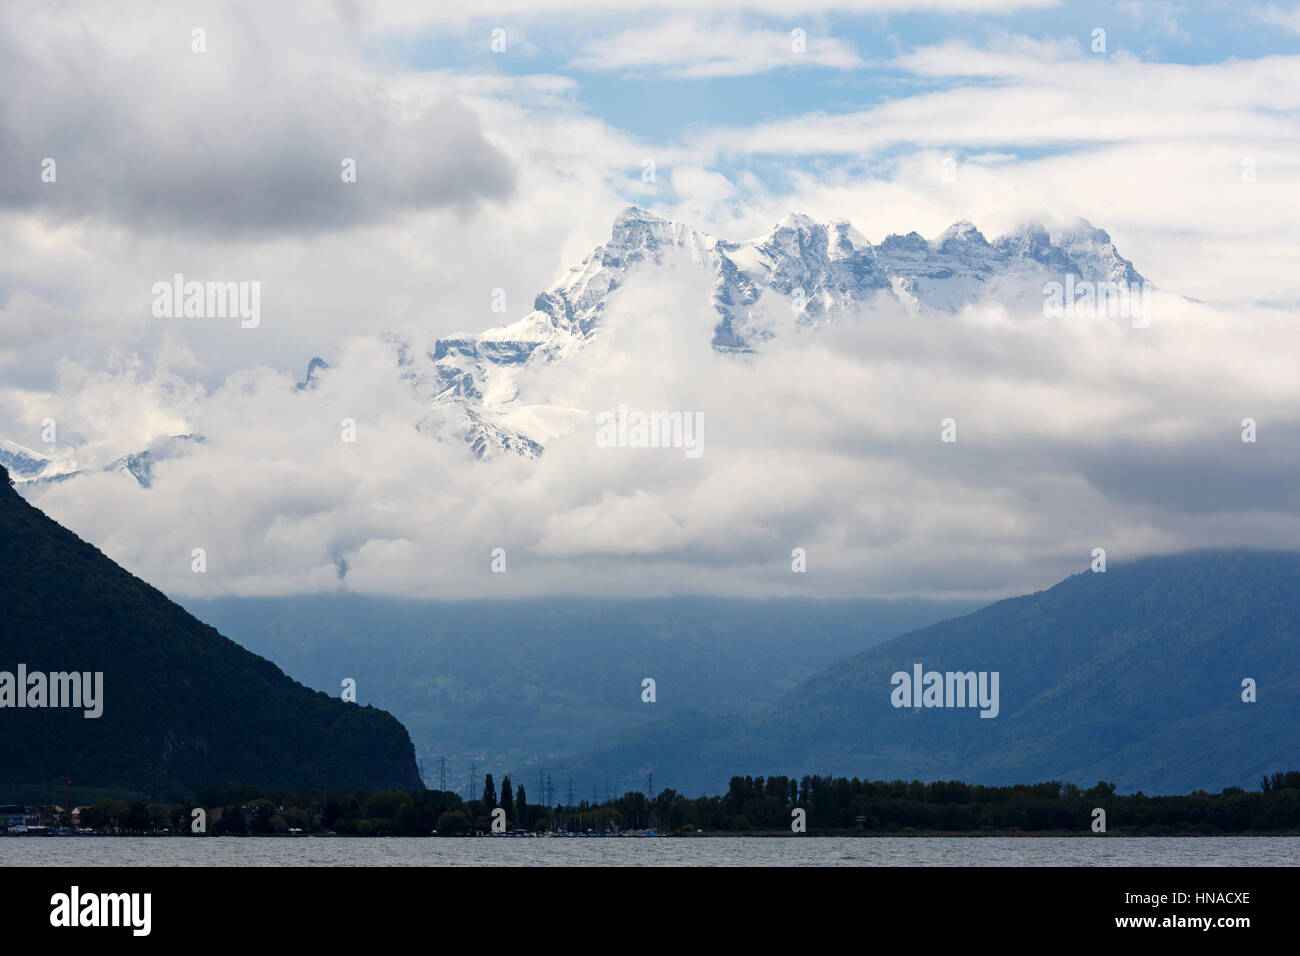 Snowy peaks of rocky mountains appeared from the clouds. Viewed from the town of Montreux closer located hills and Lake Geneva can be seen in the shad Stock Photo